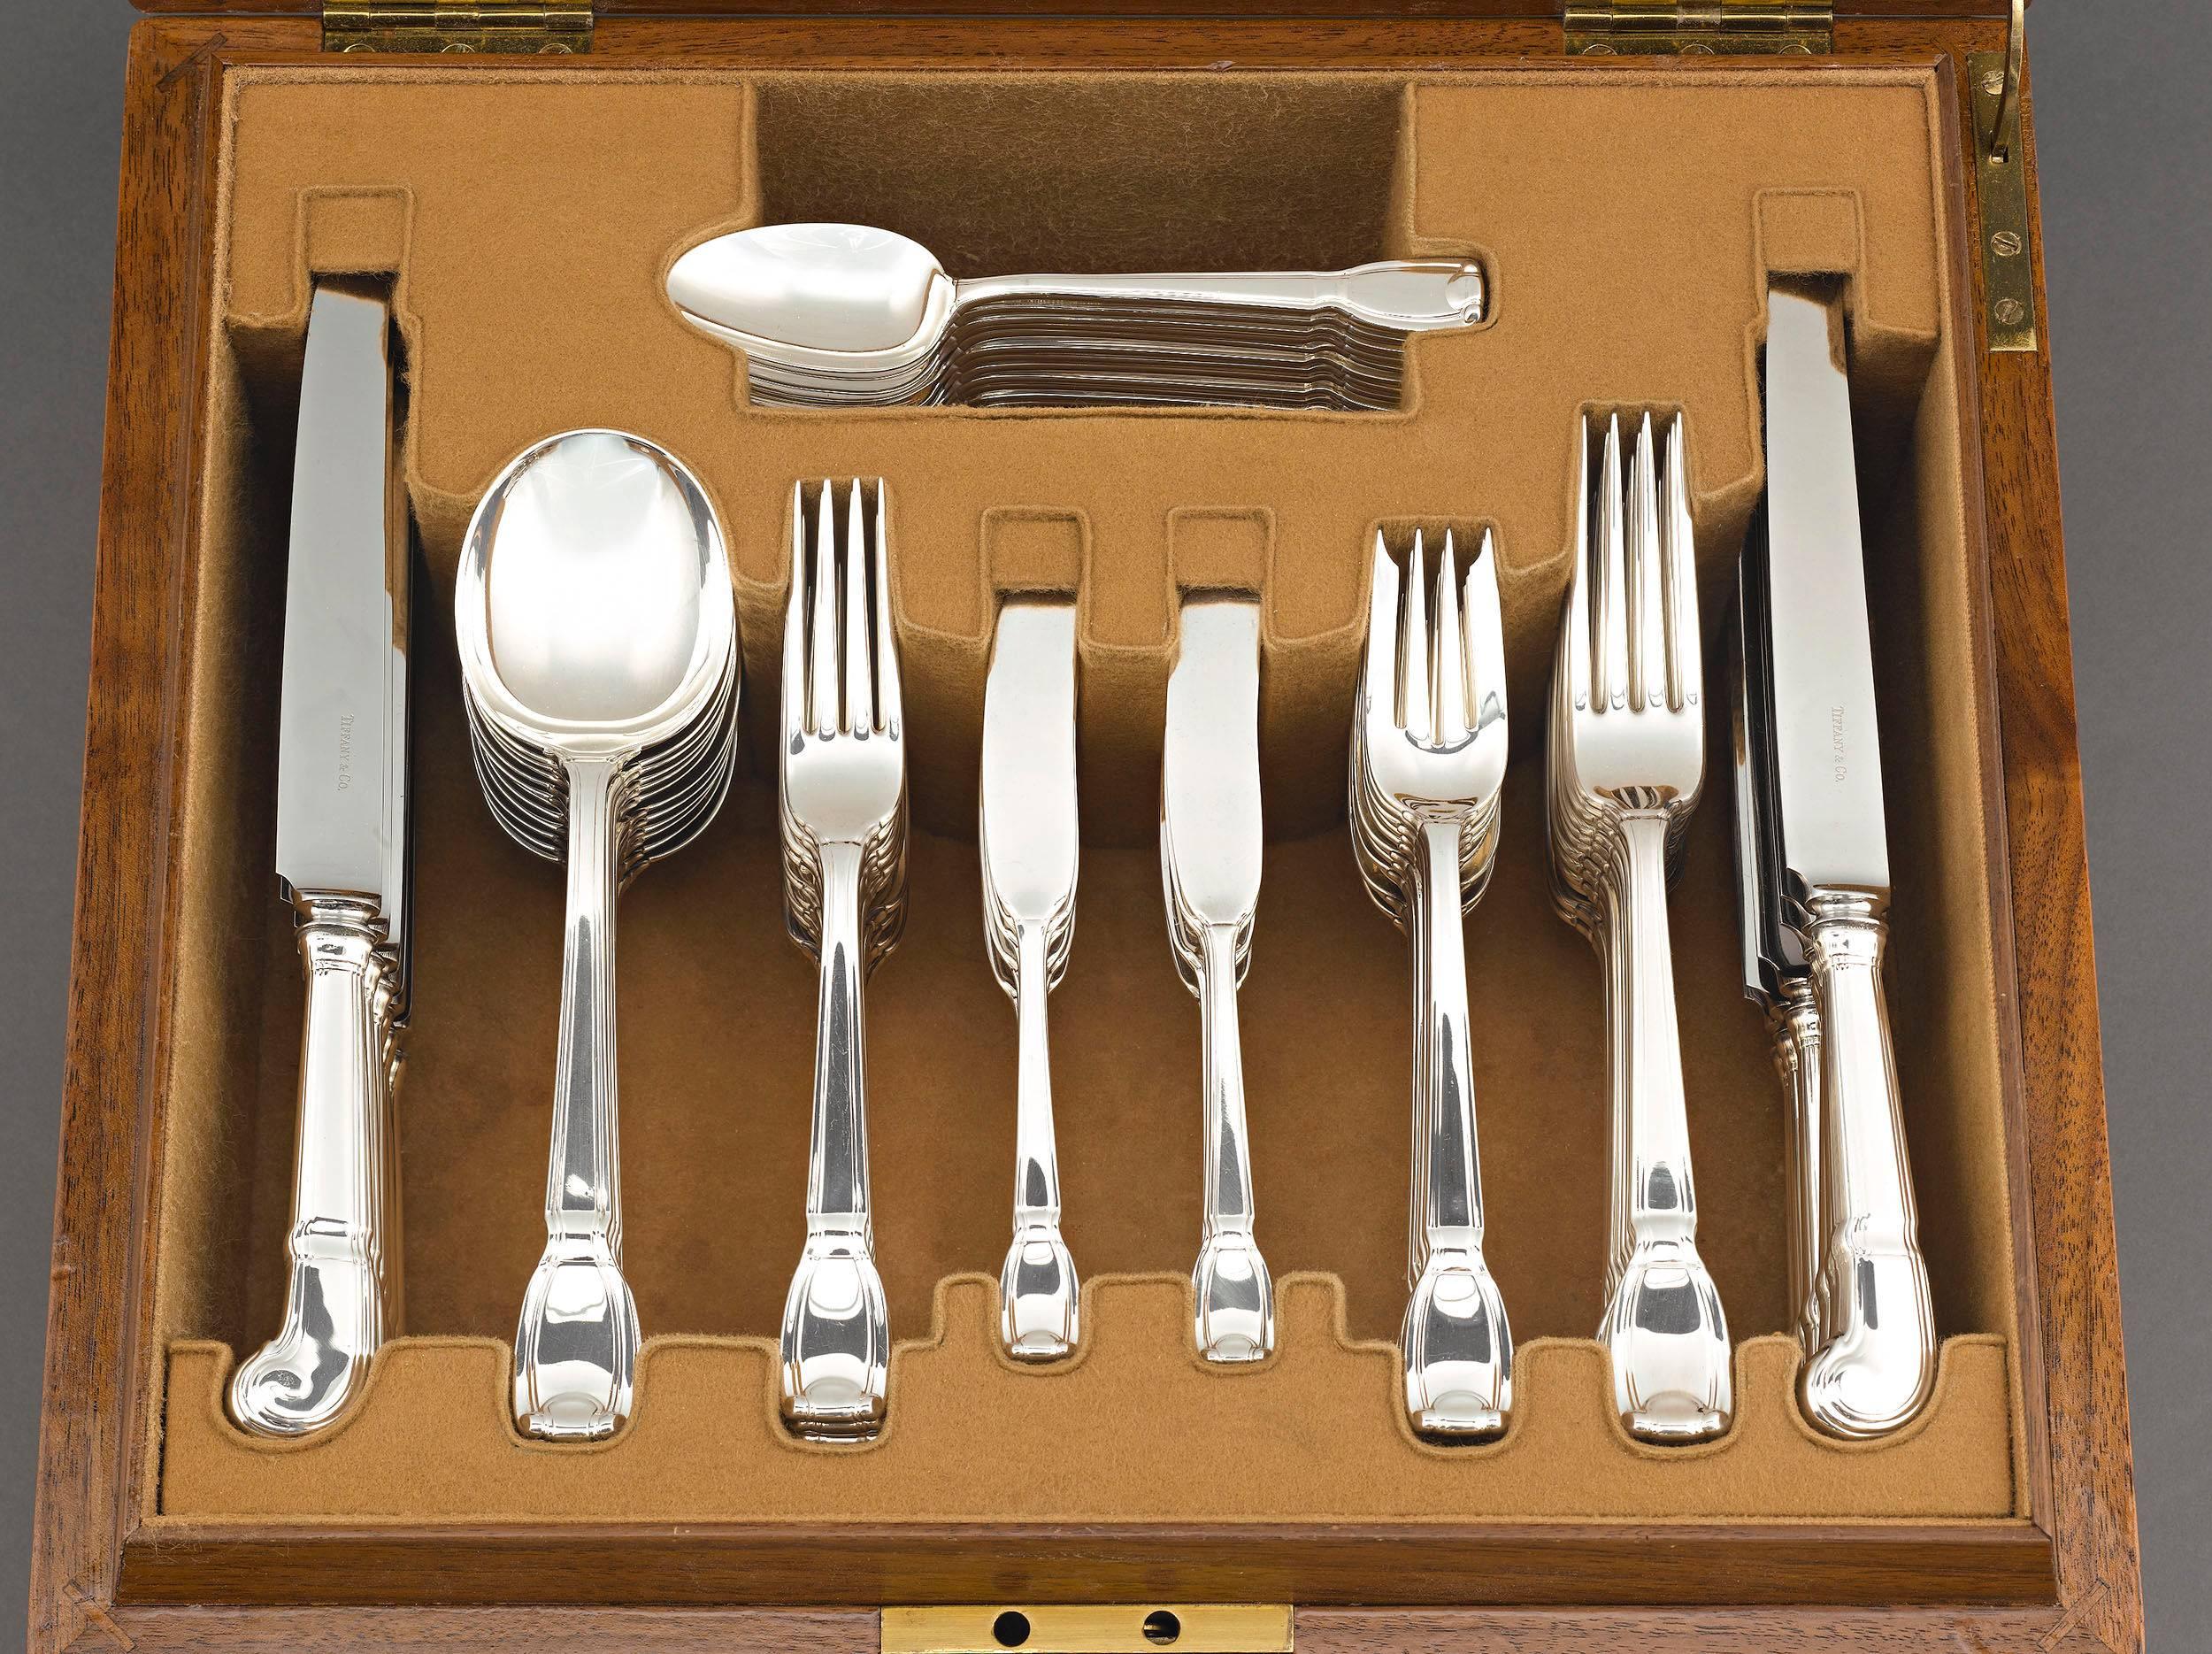 Sleek Art Deco styling distinguishes this exceptional 84-piece Tiffany & Co. silver flatware service. Crafted in the classic Castilian pattern, this service for 12 truly epitomizes the understated sophistication of the Art Deco period. Introduced in